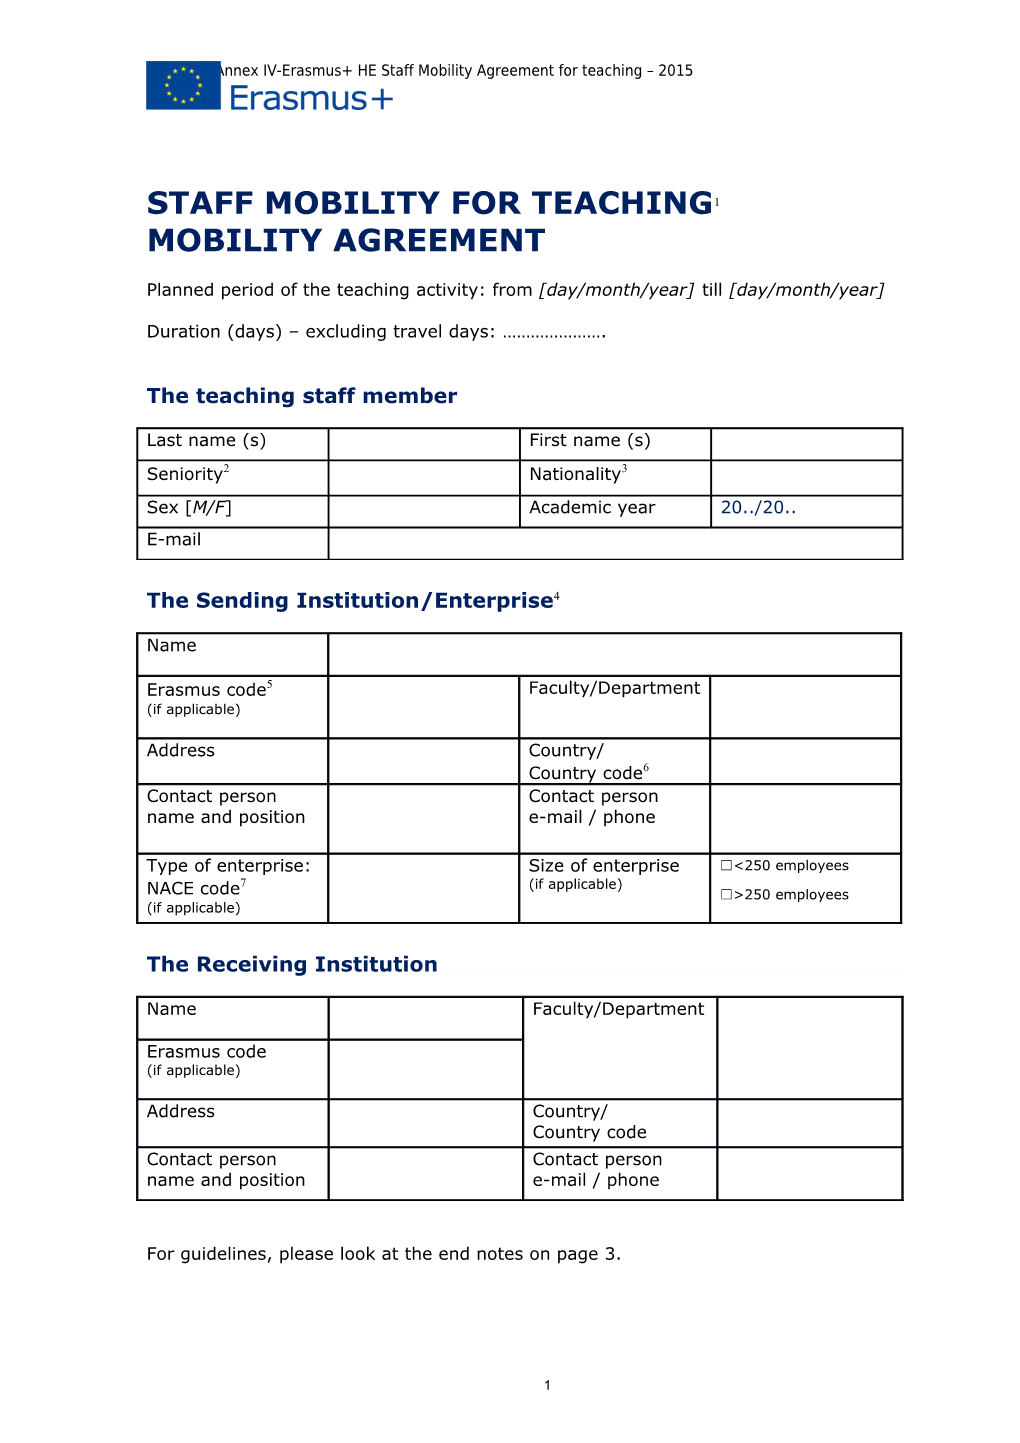 Gfna-II-C-Annex IV-Erasmus+ HE Staff Mobility Agreement for Teaching 2015 s2